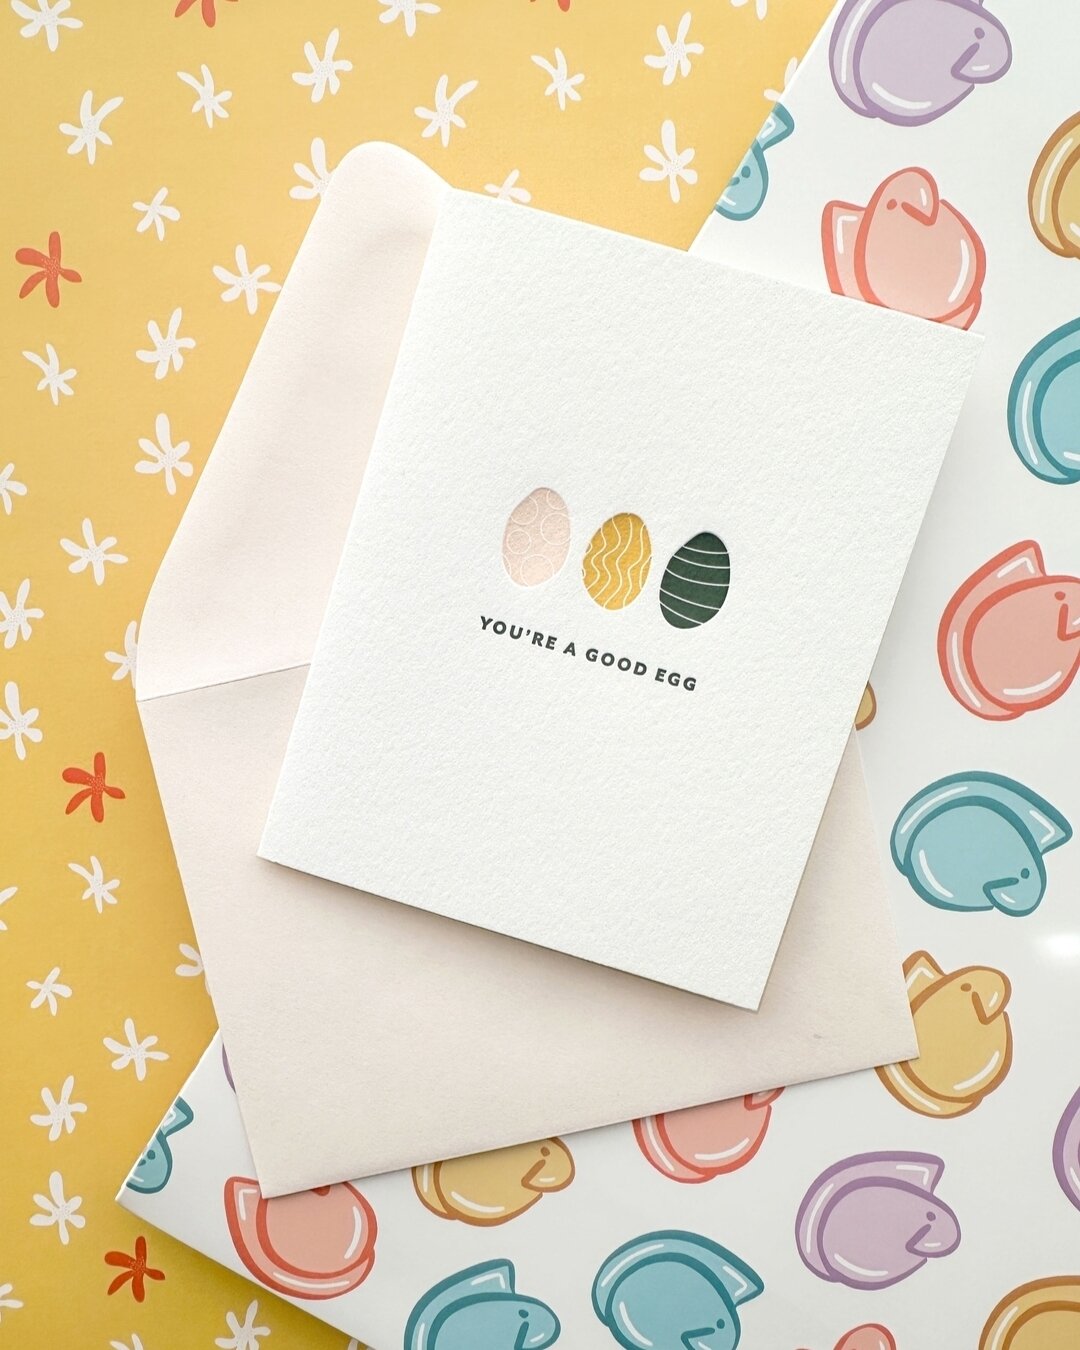 Last minute Easter card shopping? We've got you covered! 🐣🐰 Stop by the shop today from 11am to 3:30pm and find the perfect card to spread some springtime joy. 💌🌷

#eastercards #lastminuteshopping #shoplocal #greetingcards #easterbunny #seattlesh